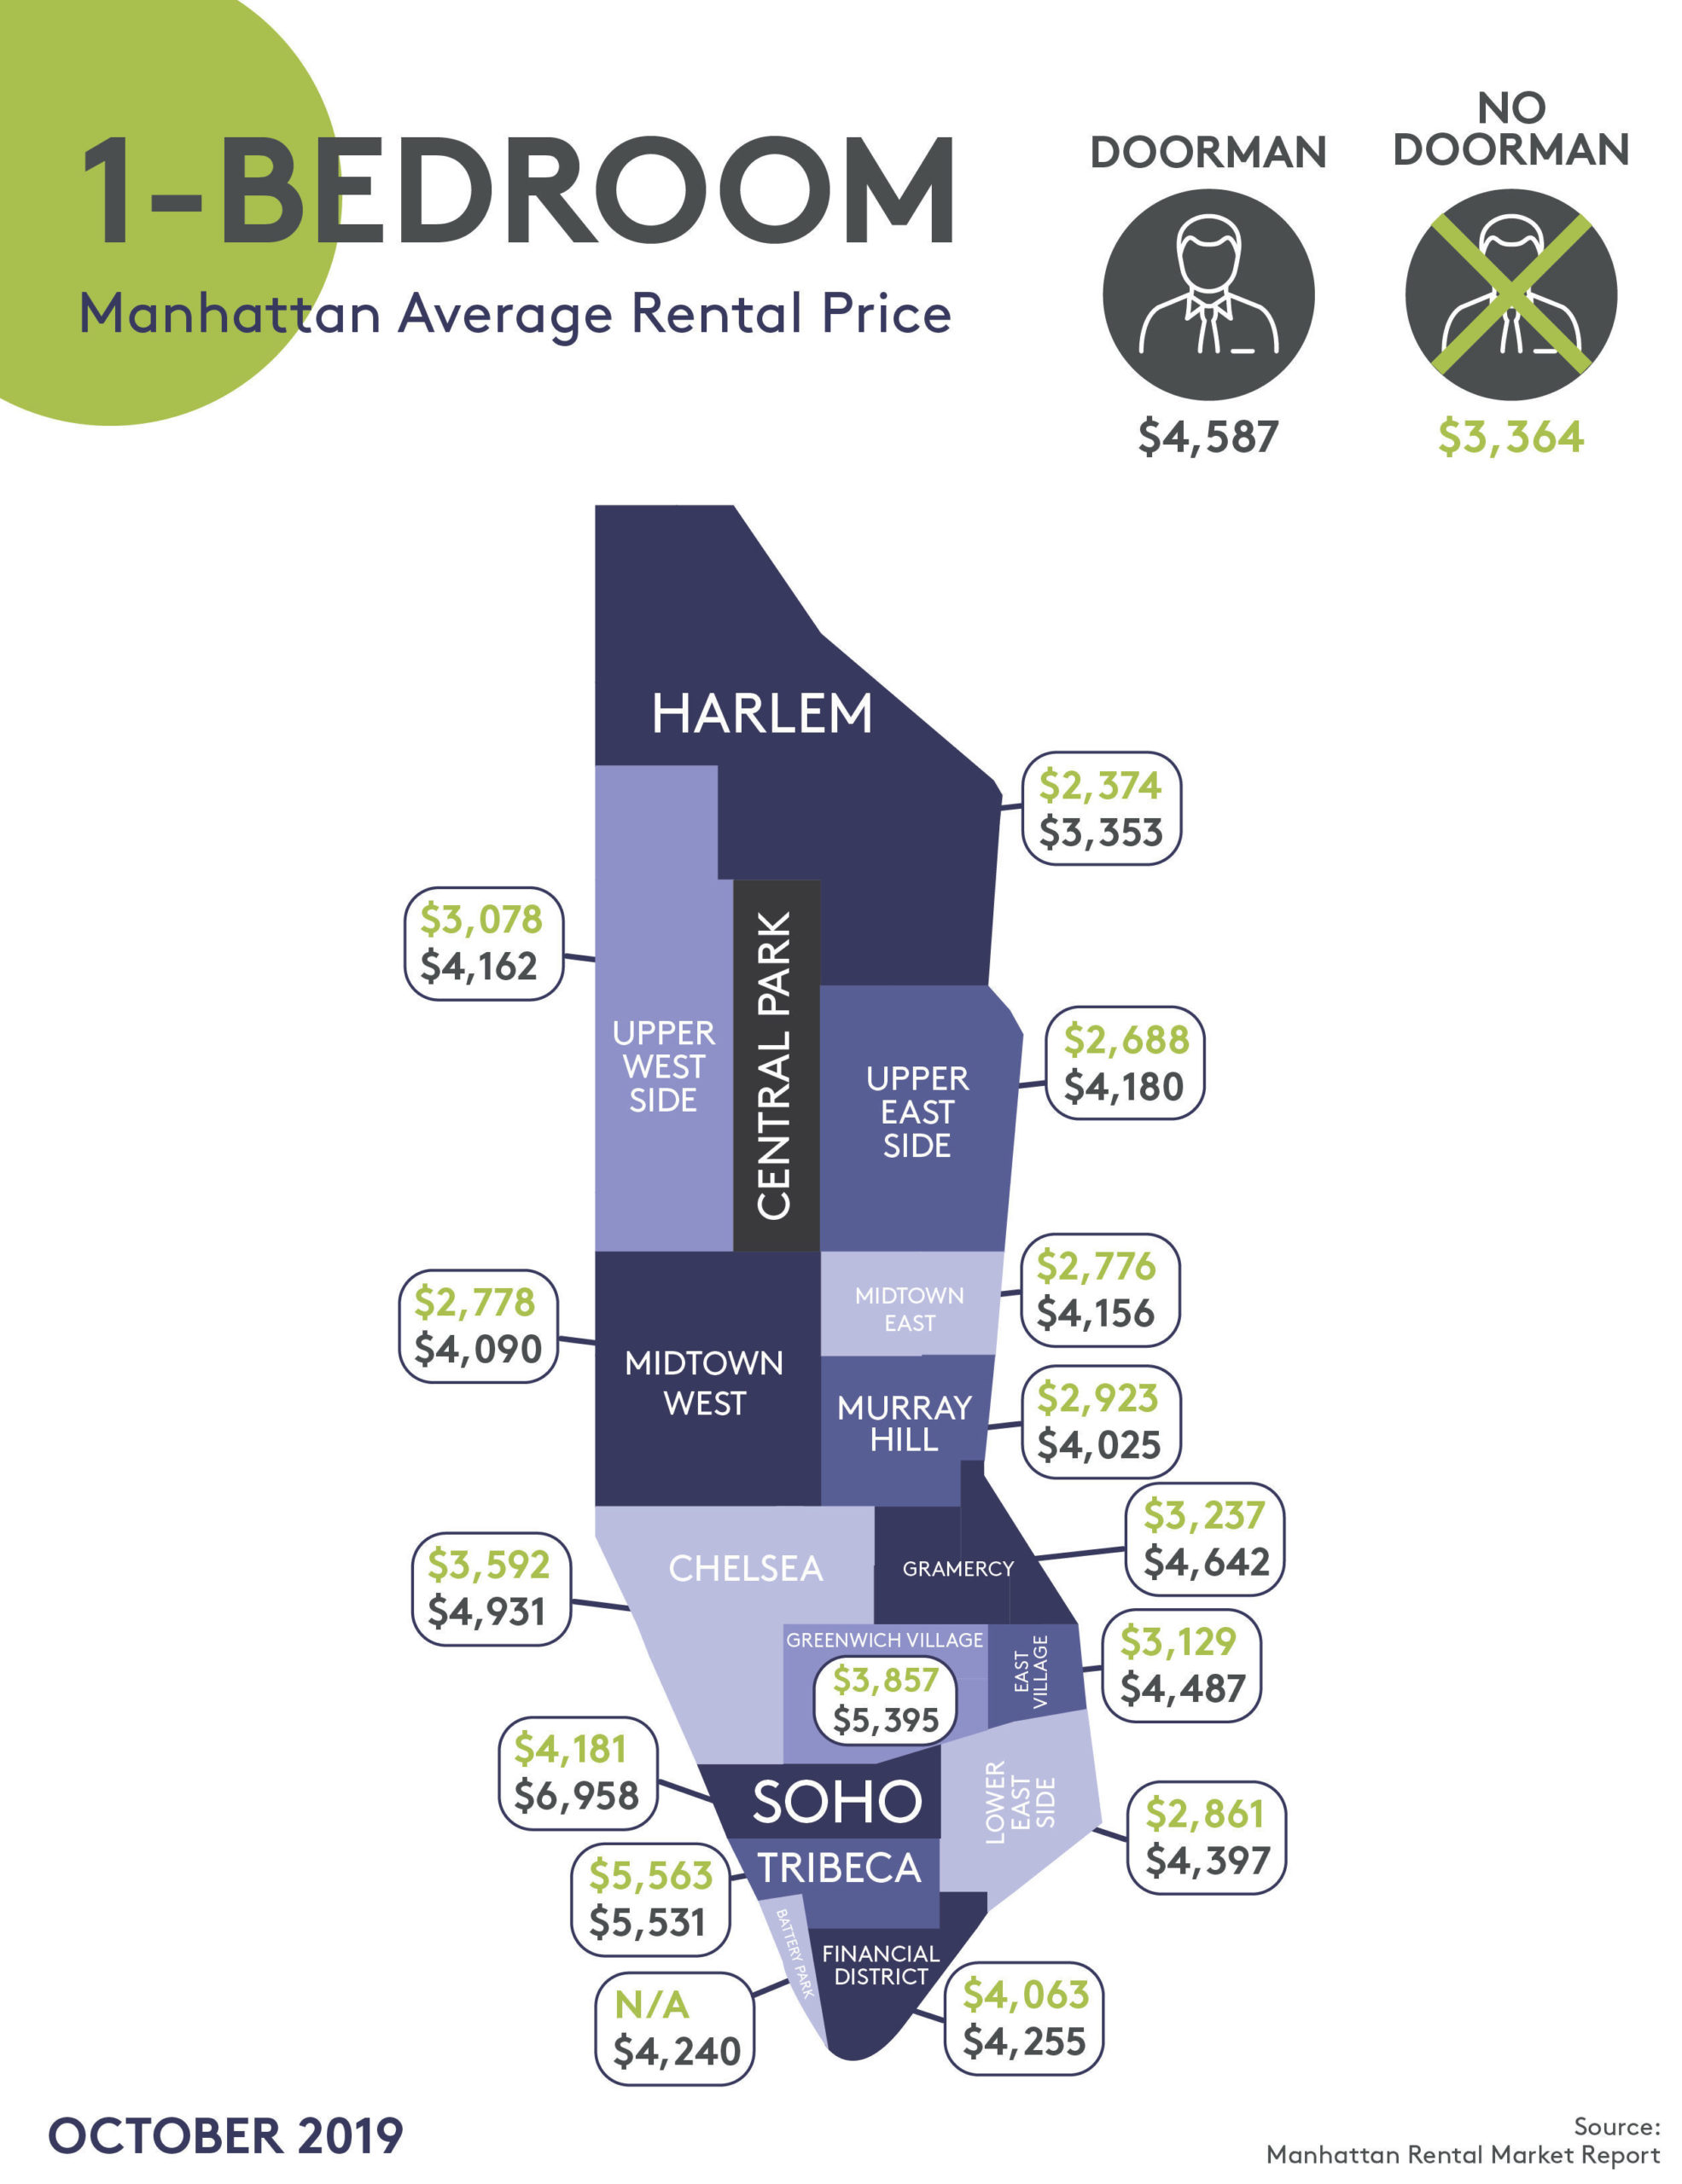 Prices for 1-bedroom apartments in Manhattan